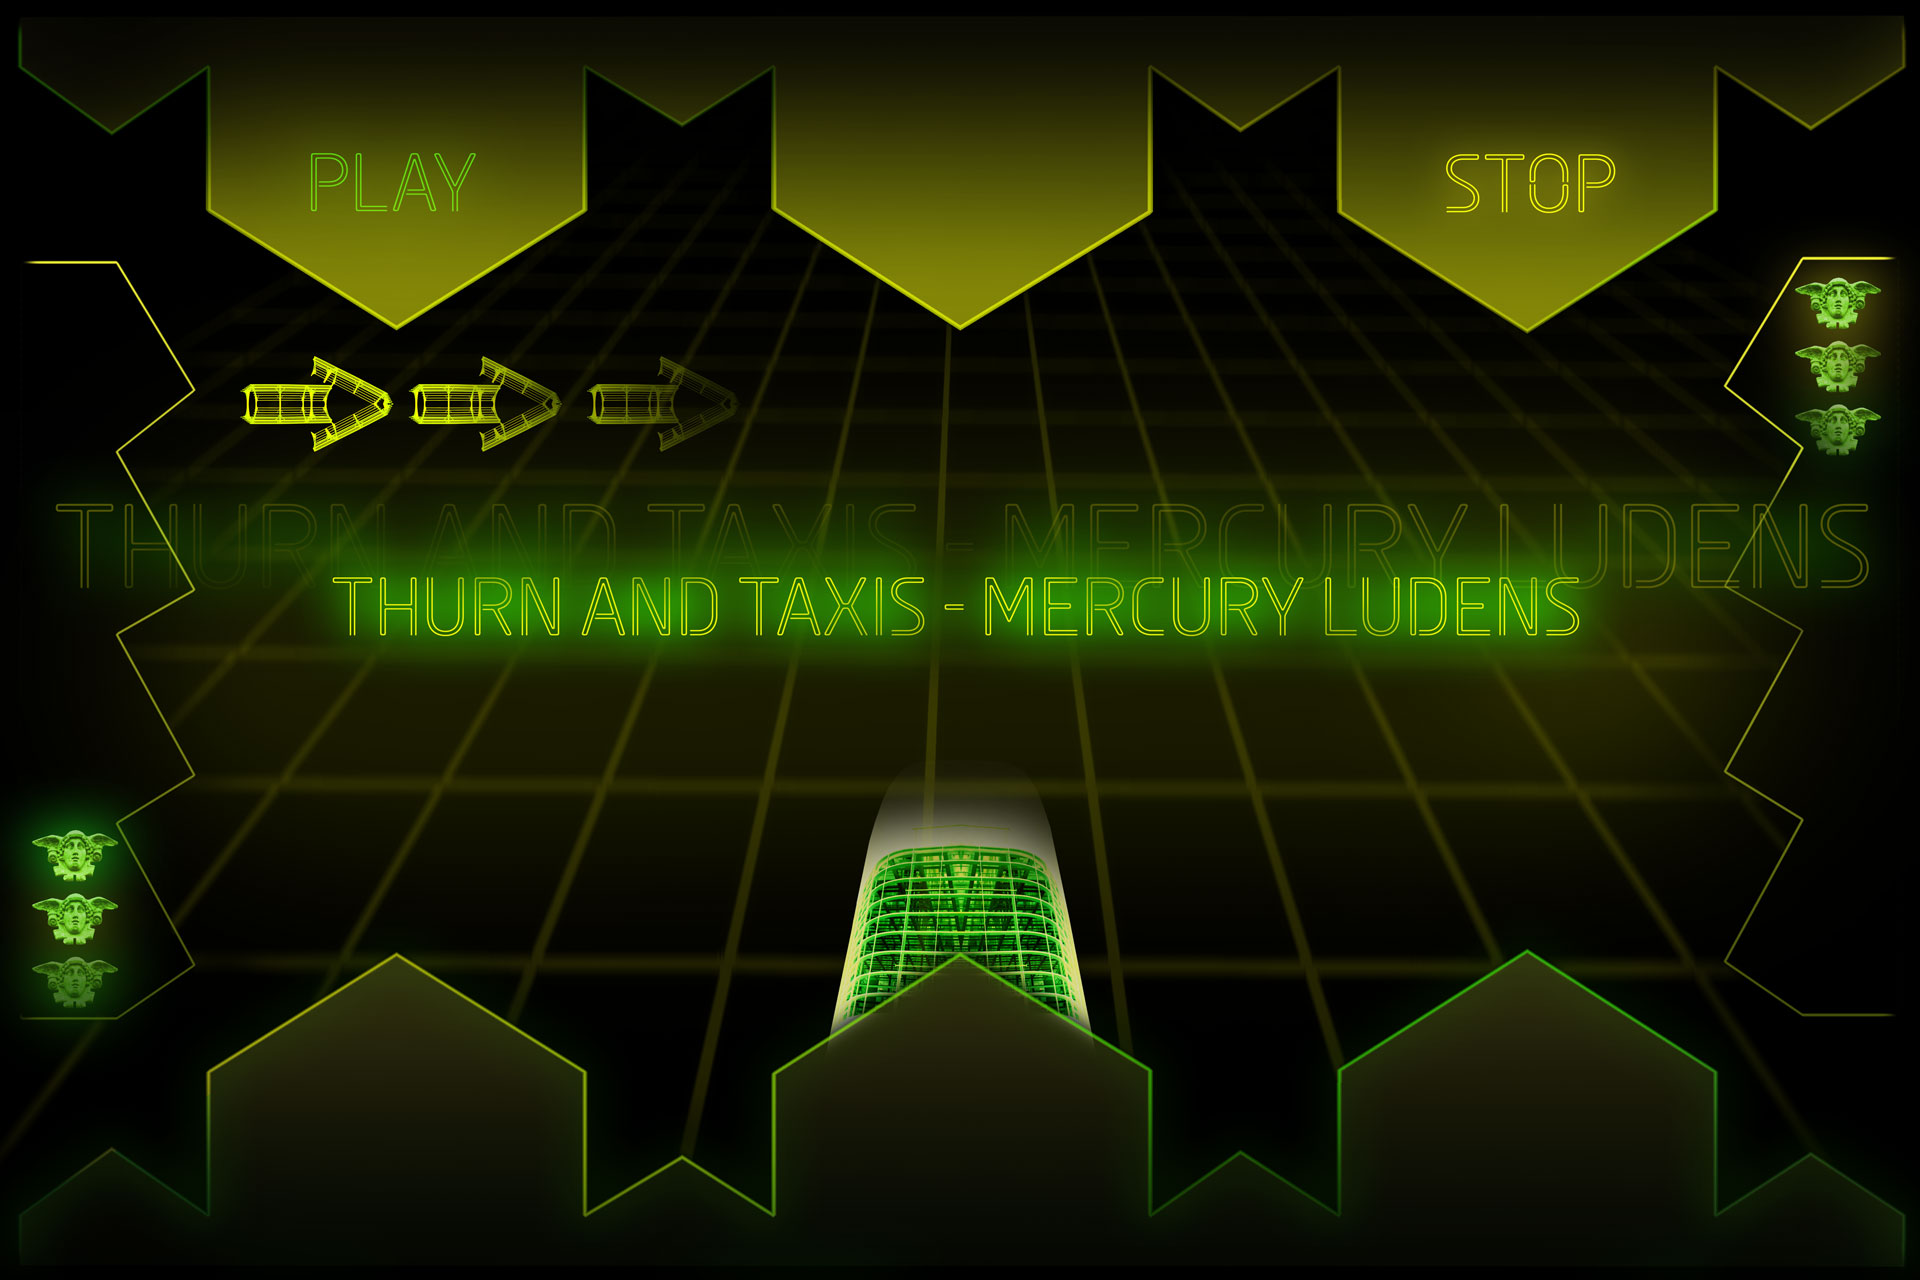 You are currently viewing Ontdek de 3 levels van Thurn and Taxis – Mercury Ludens in 2 video’s (français en-dessous).